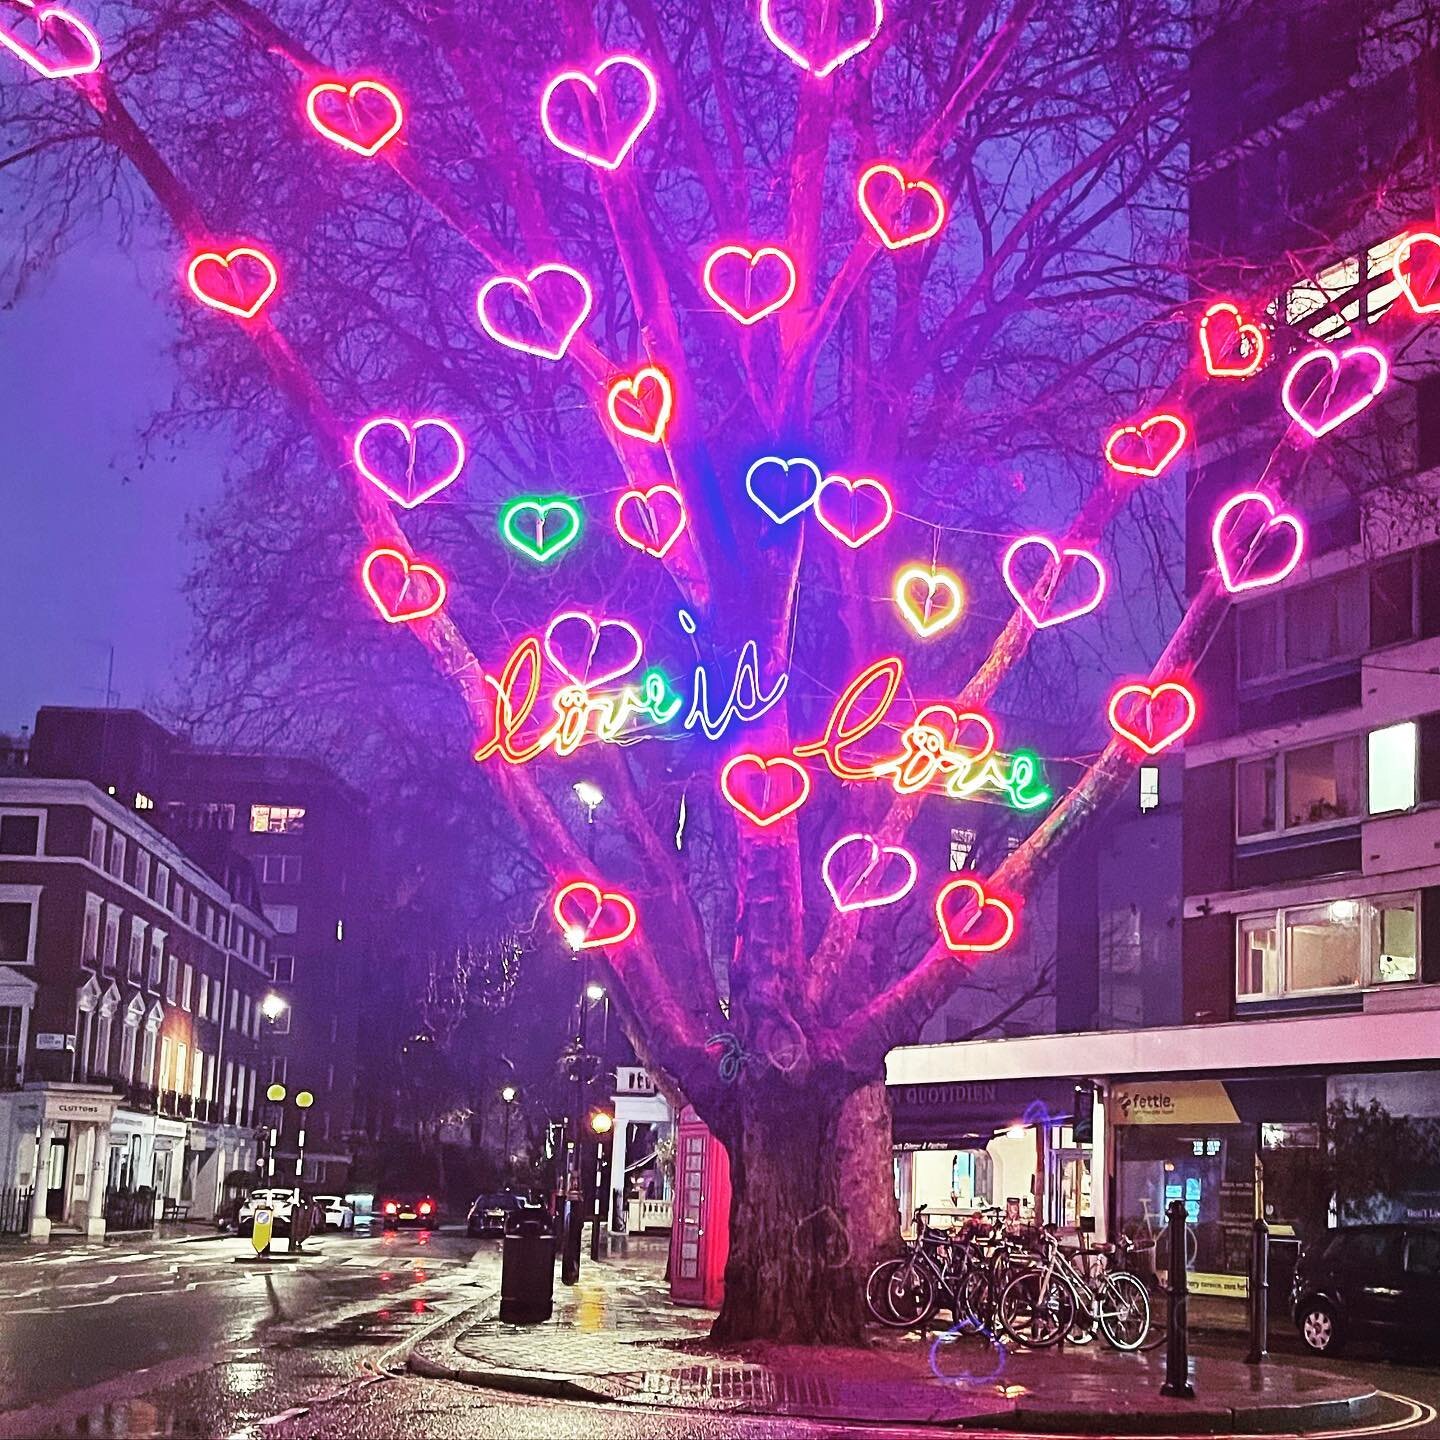 Take a picture under the tree of love when dining with us ❤️ To book your table visit our website or call us
#valentinesday  #valentinesday2022  #valentinesdaylondon  #vday  #loveislove
#indianrestaurantlondon #treeoflove